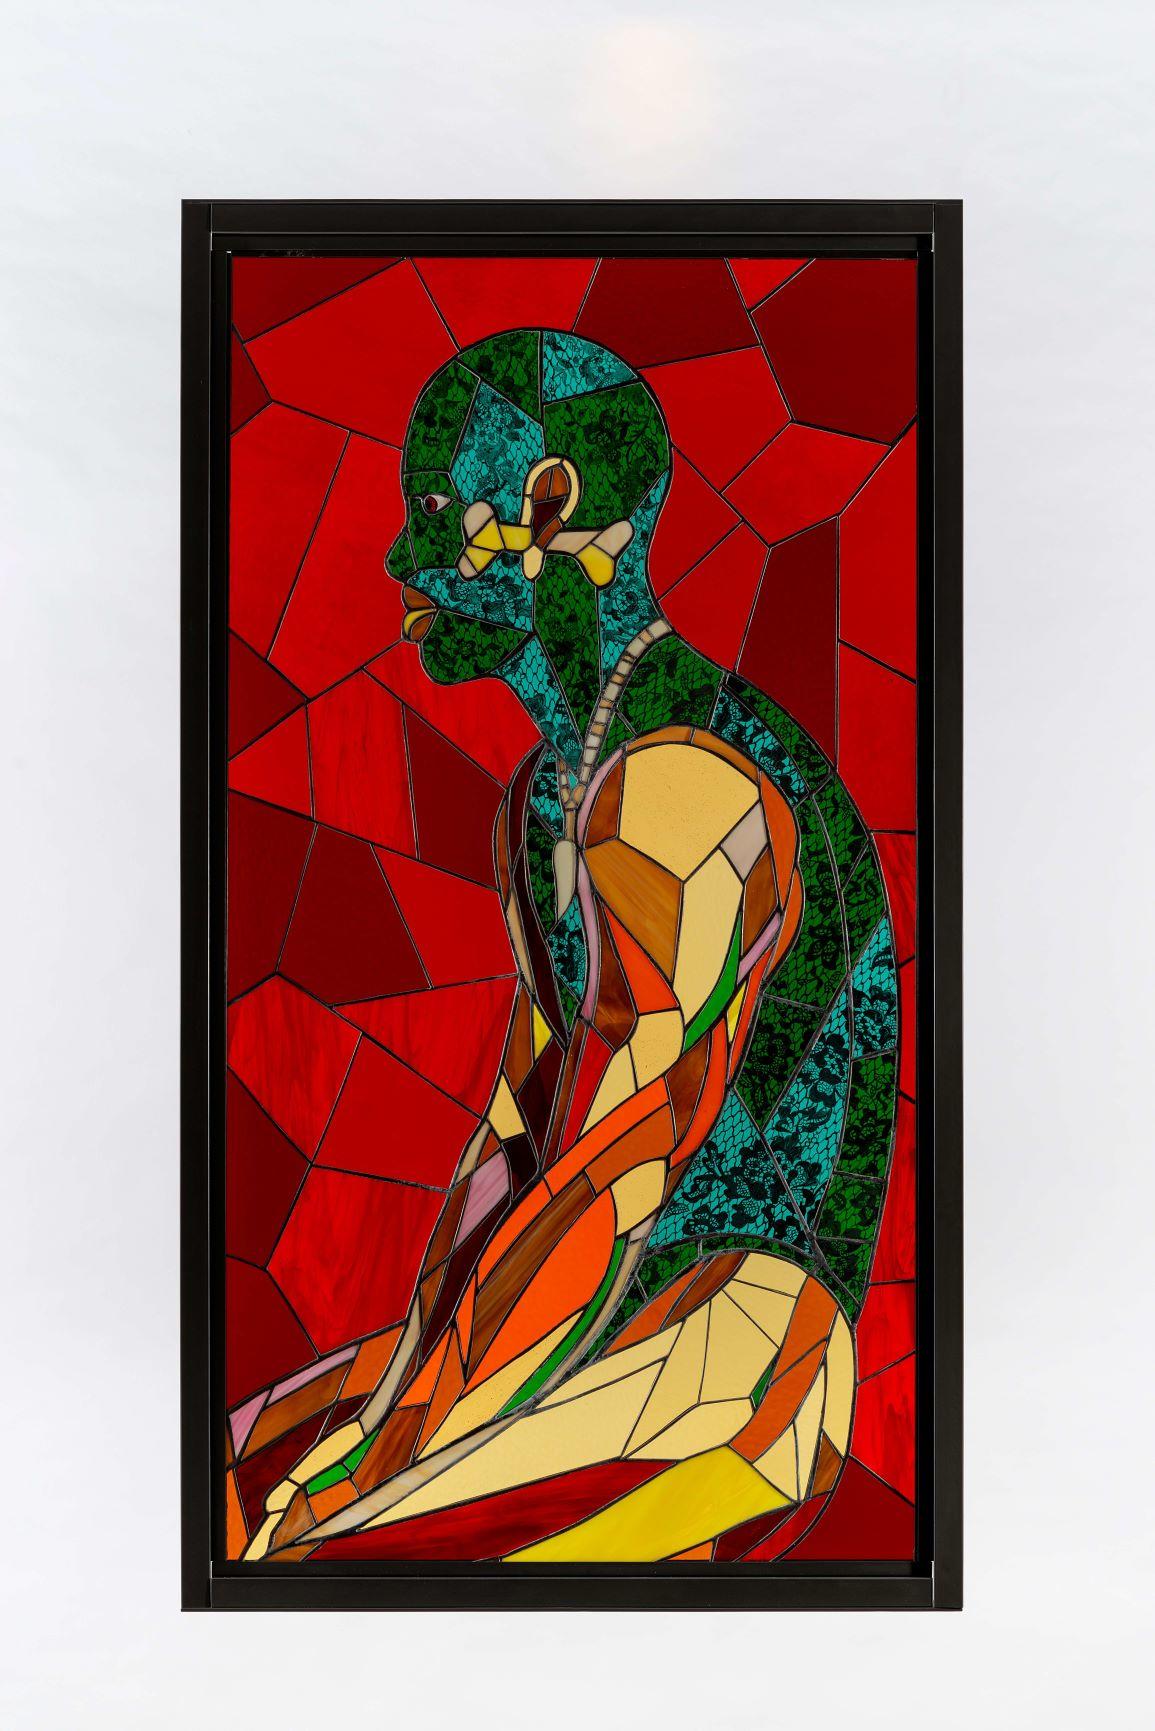 Athi-Patra Ruga, Yellow Bone, 2020. Stained glass, lead, and powder-coated steel
Artwork size: 170 x 90 cm. Framed size: 180 x 100 x 4 cm © Credit Photo Matthew Bradley. 
Courtesy of WHATIFTHEWORLD Gallery